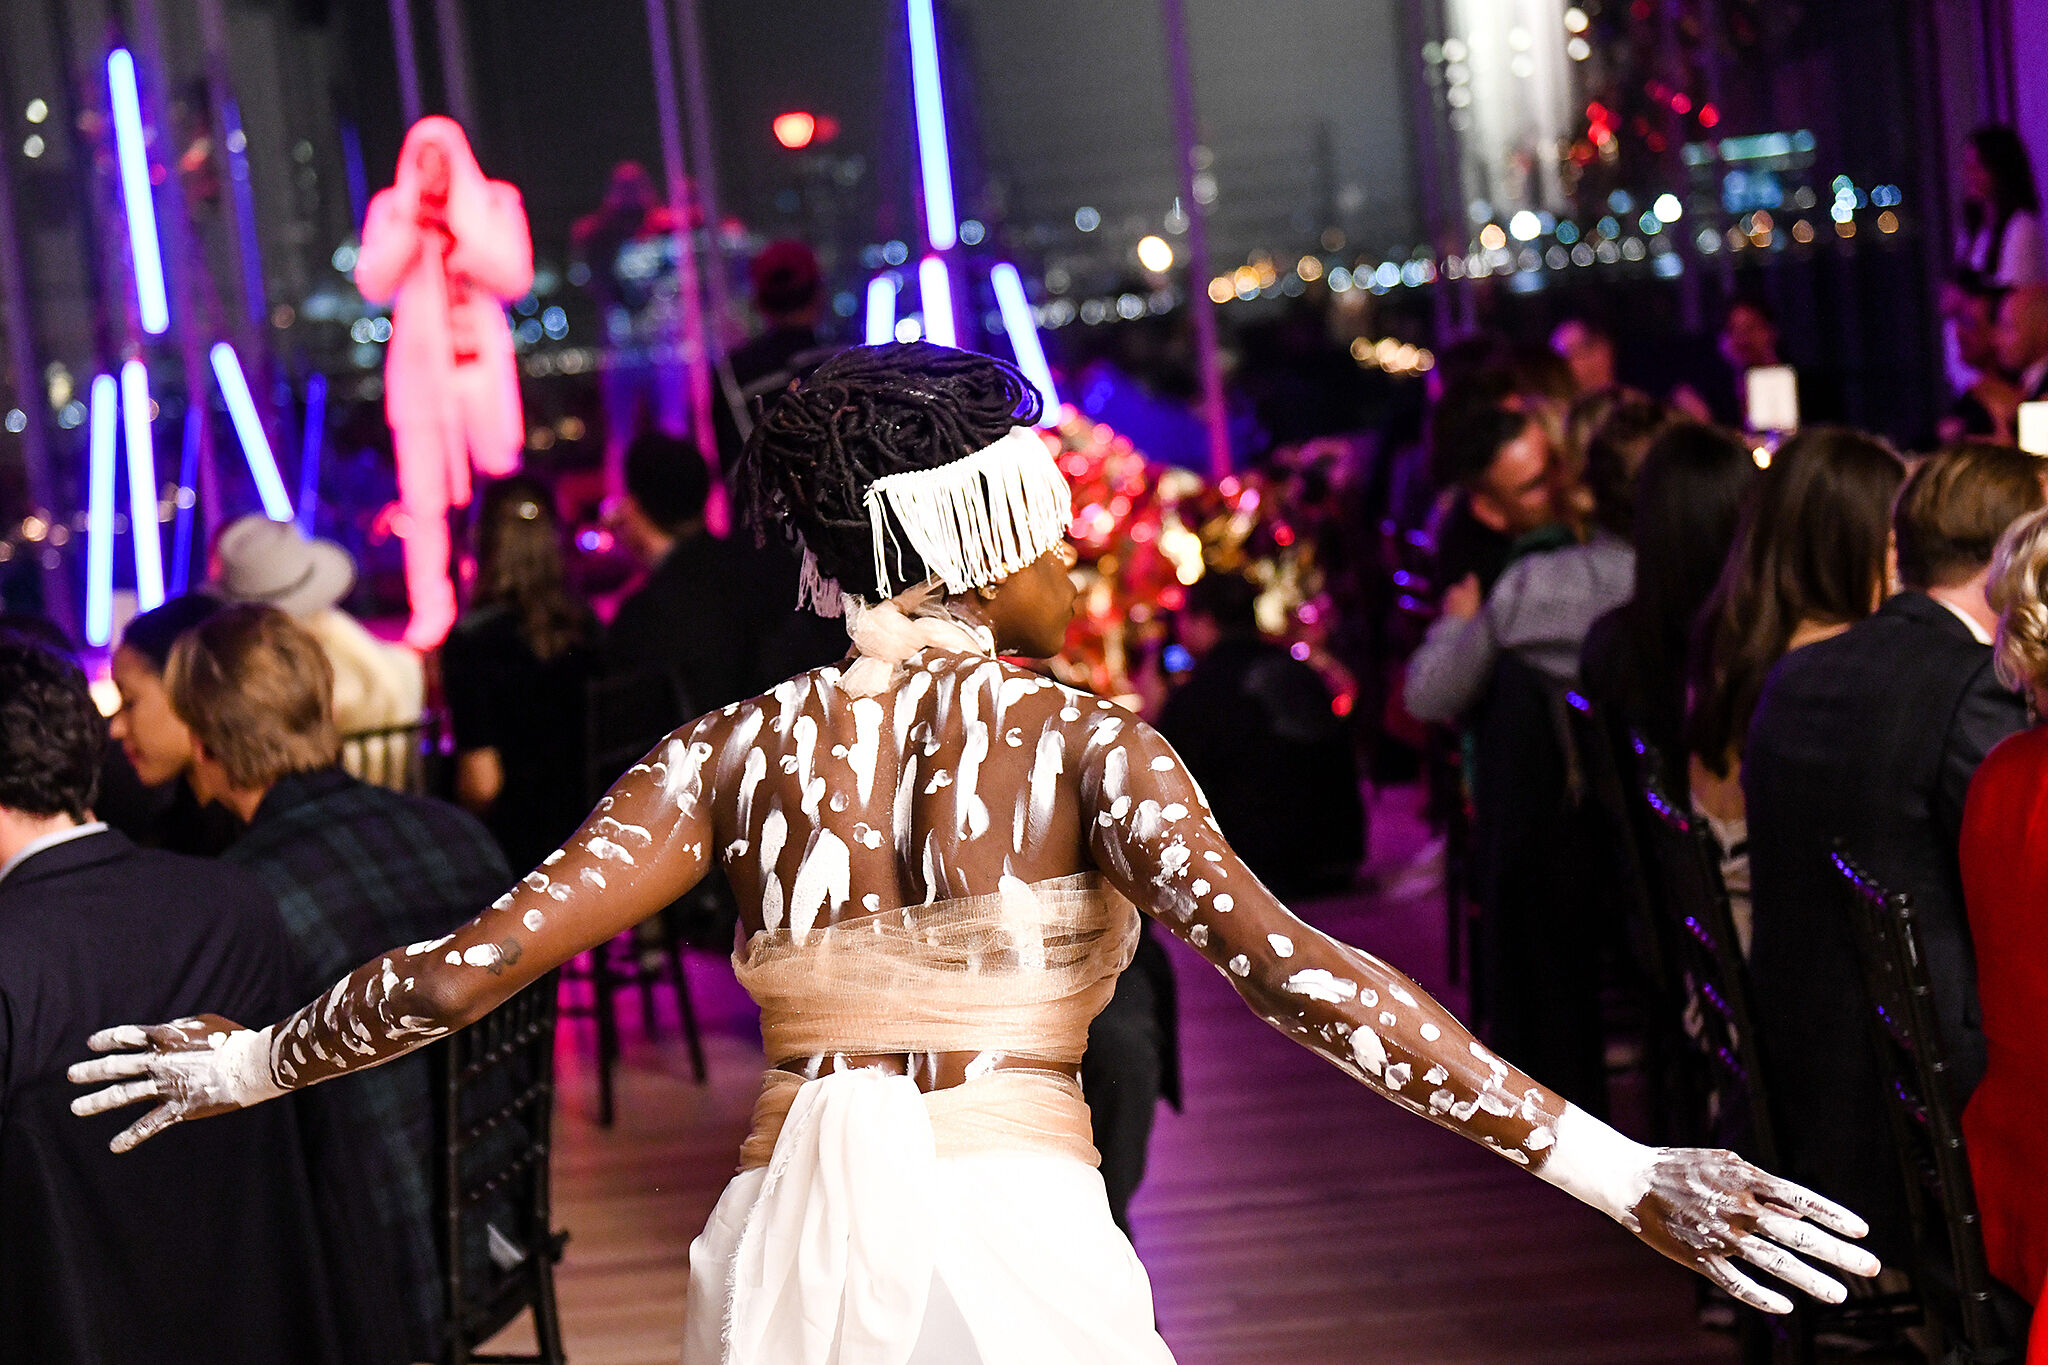 Person with painted skin and headpiece at a party with neon lights and cityscape in the background.